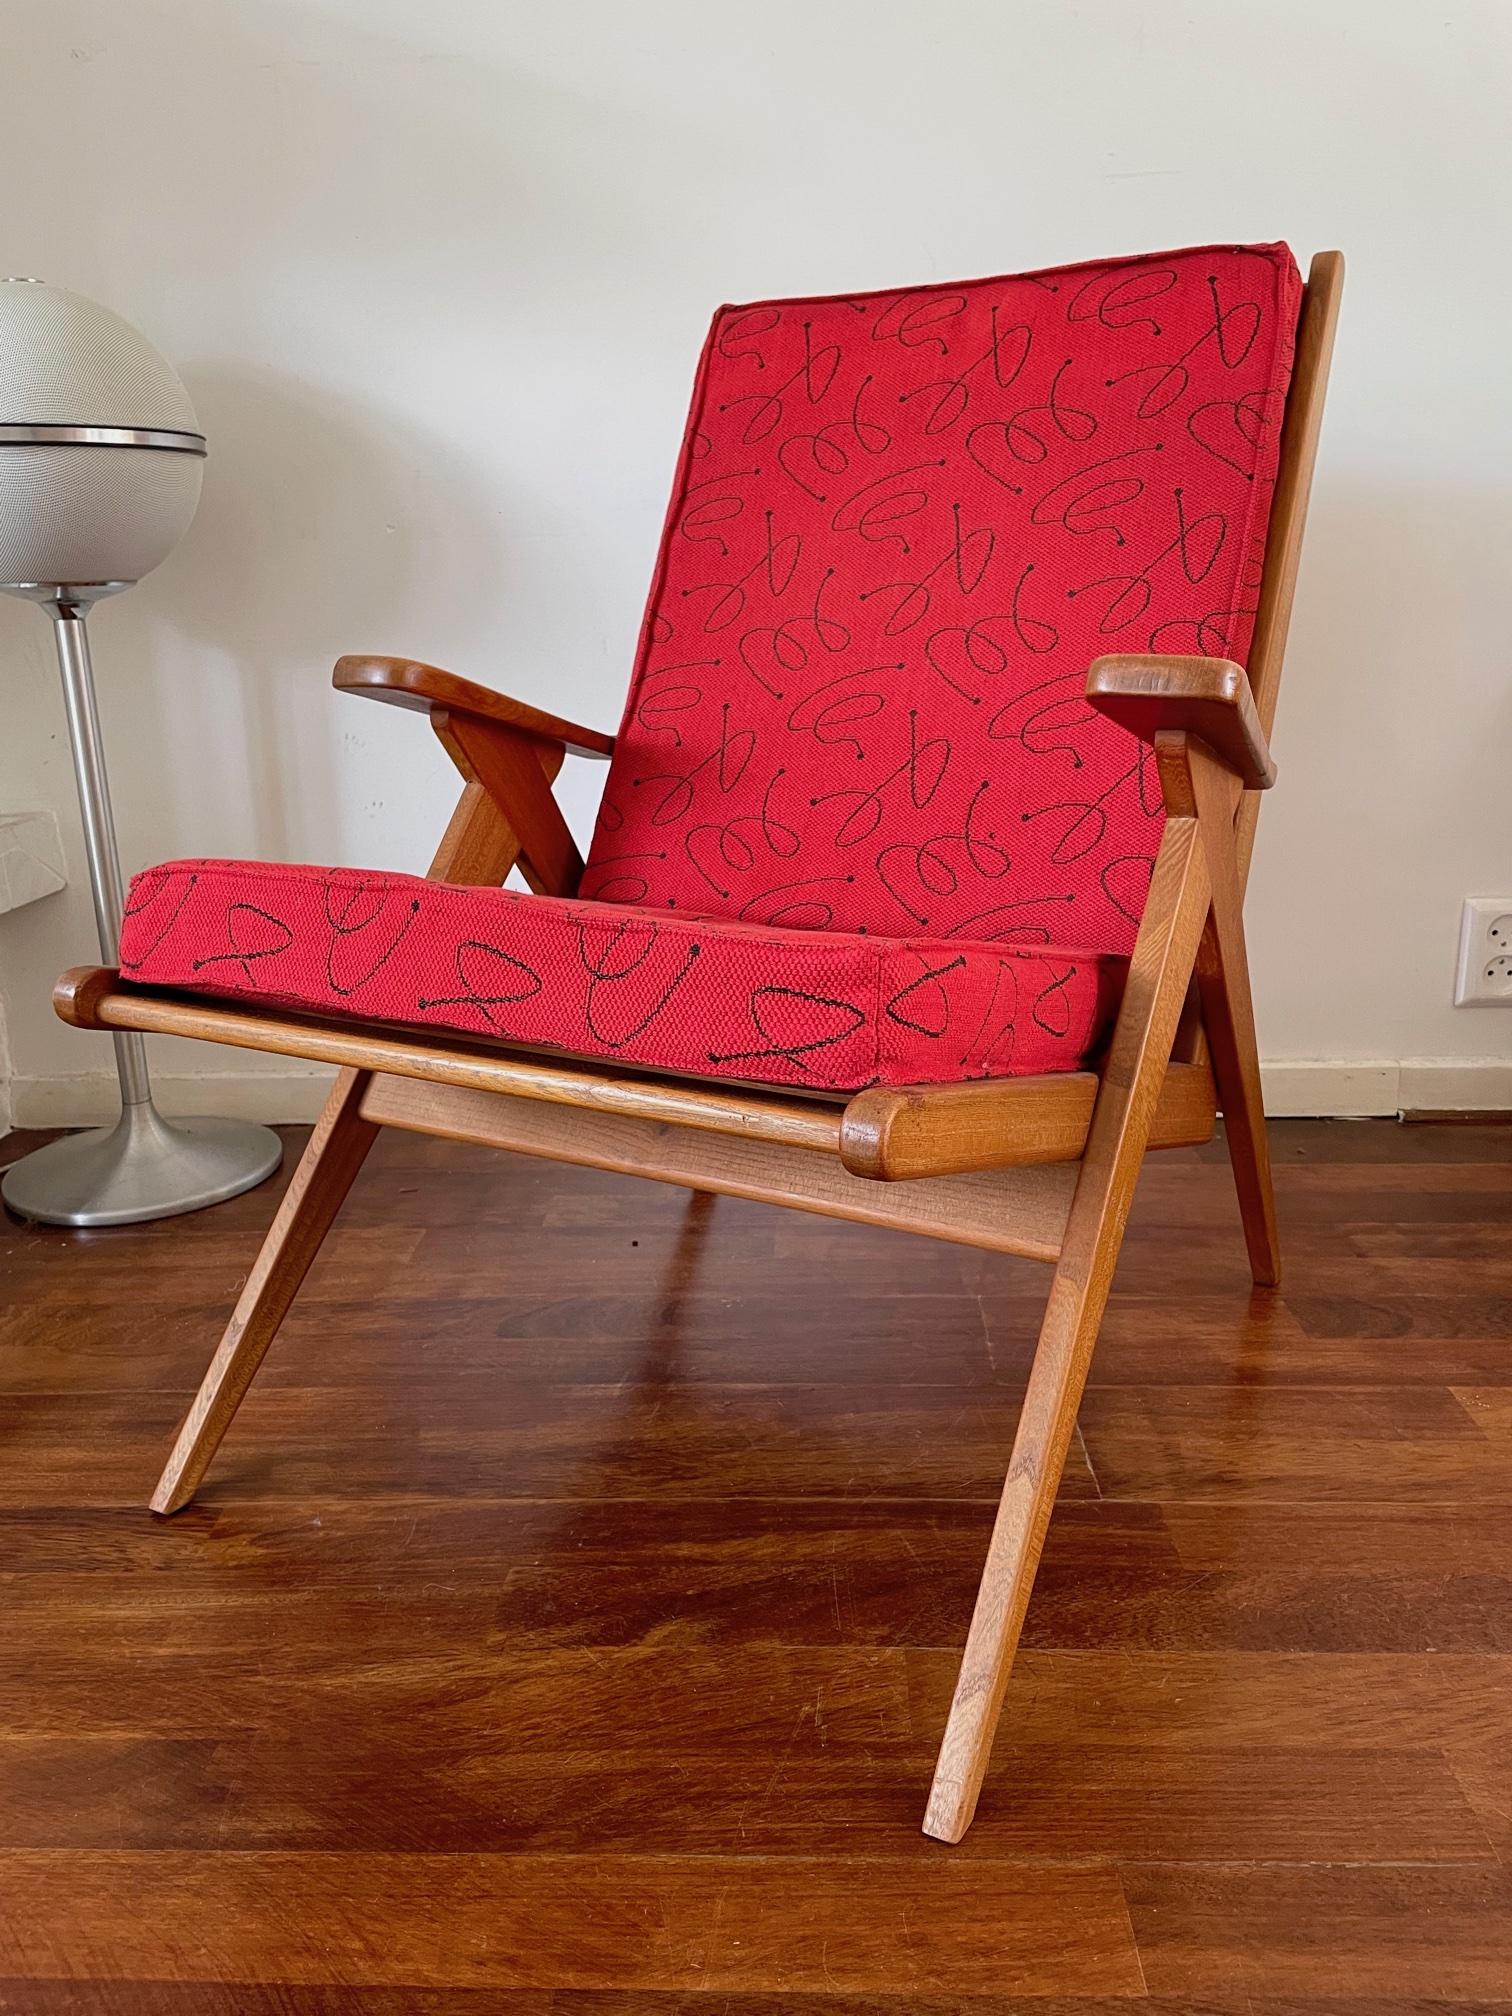 This is a beautiful piece of furniture. As timeless as you can get them. I almost perfect condition. The wooden construction as well as the fabric. Eyecatching is an understatement. This is the chair you want in the livingroom. Or in the bedroom.